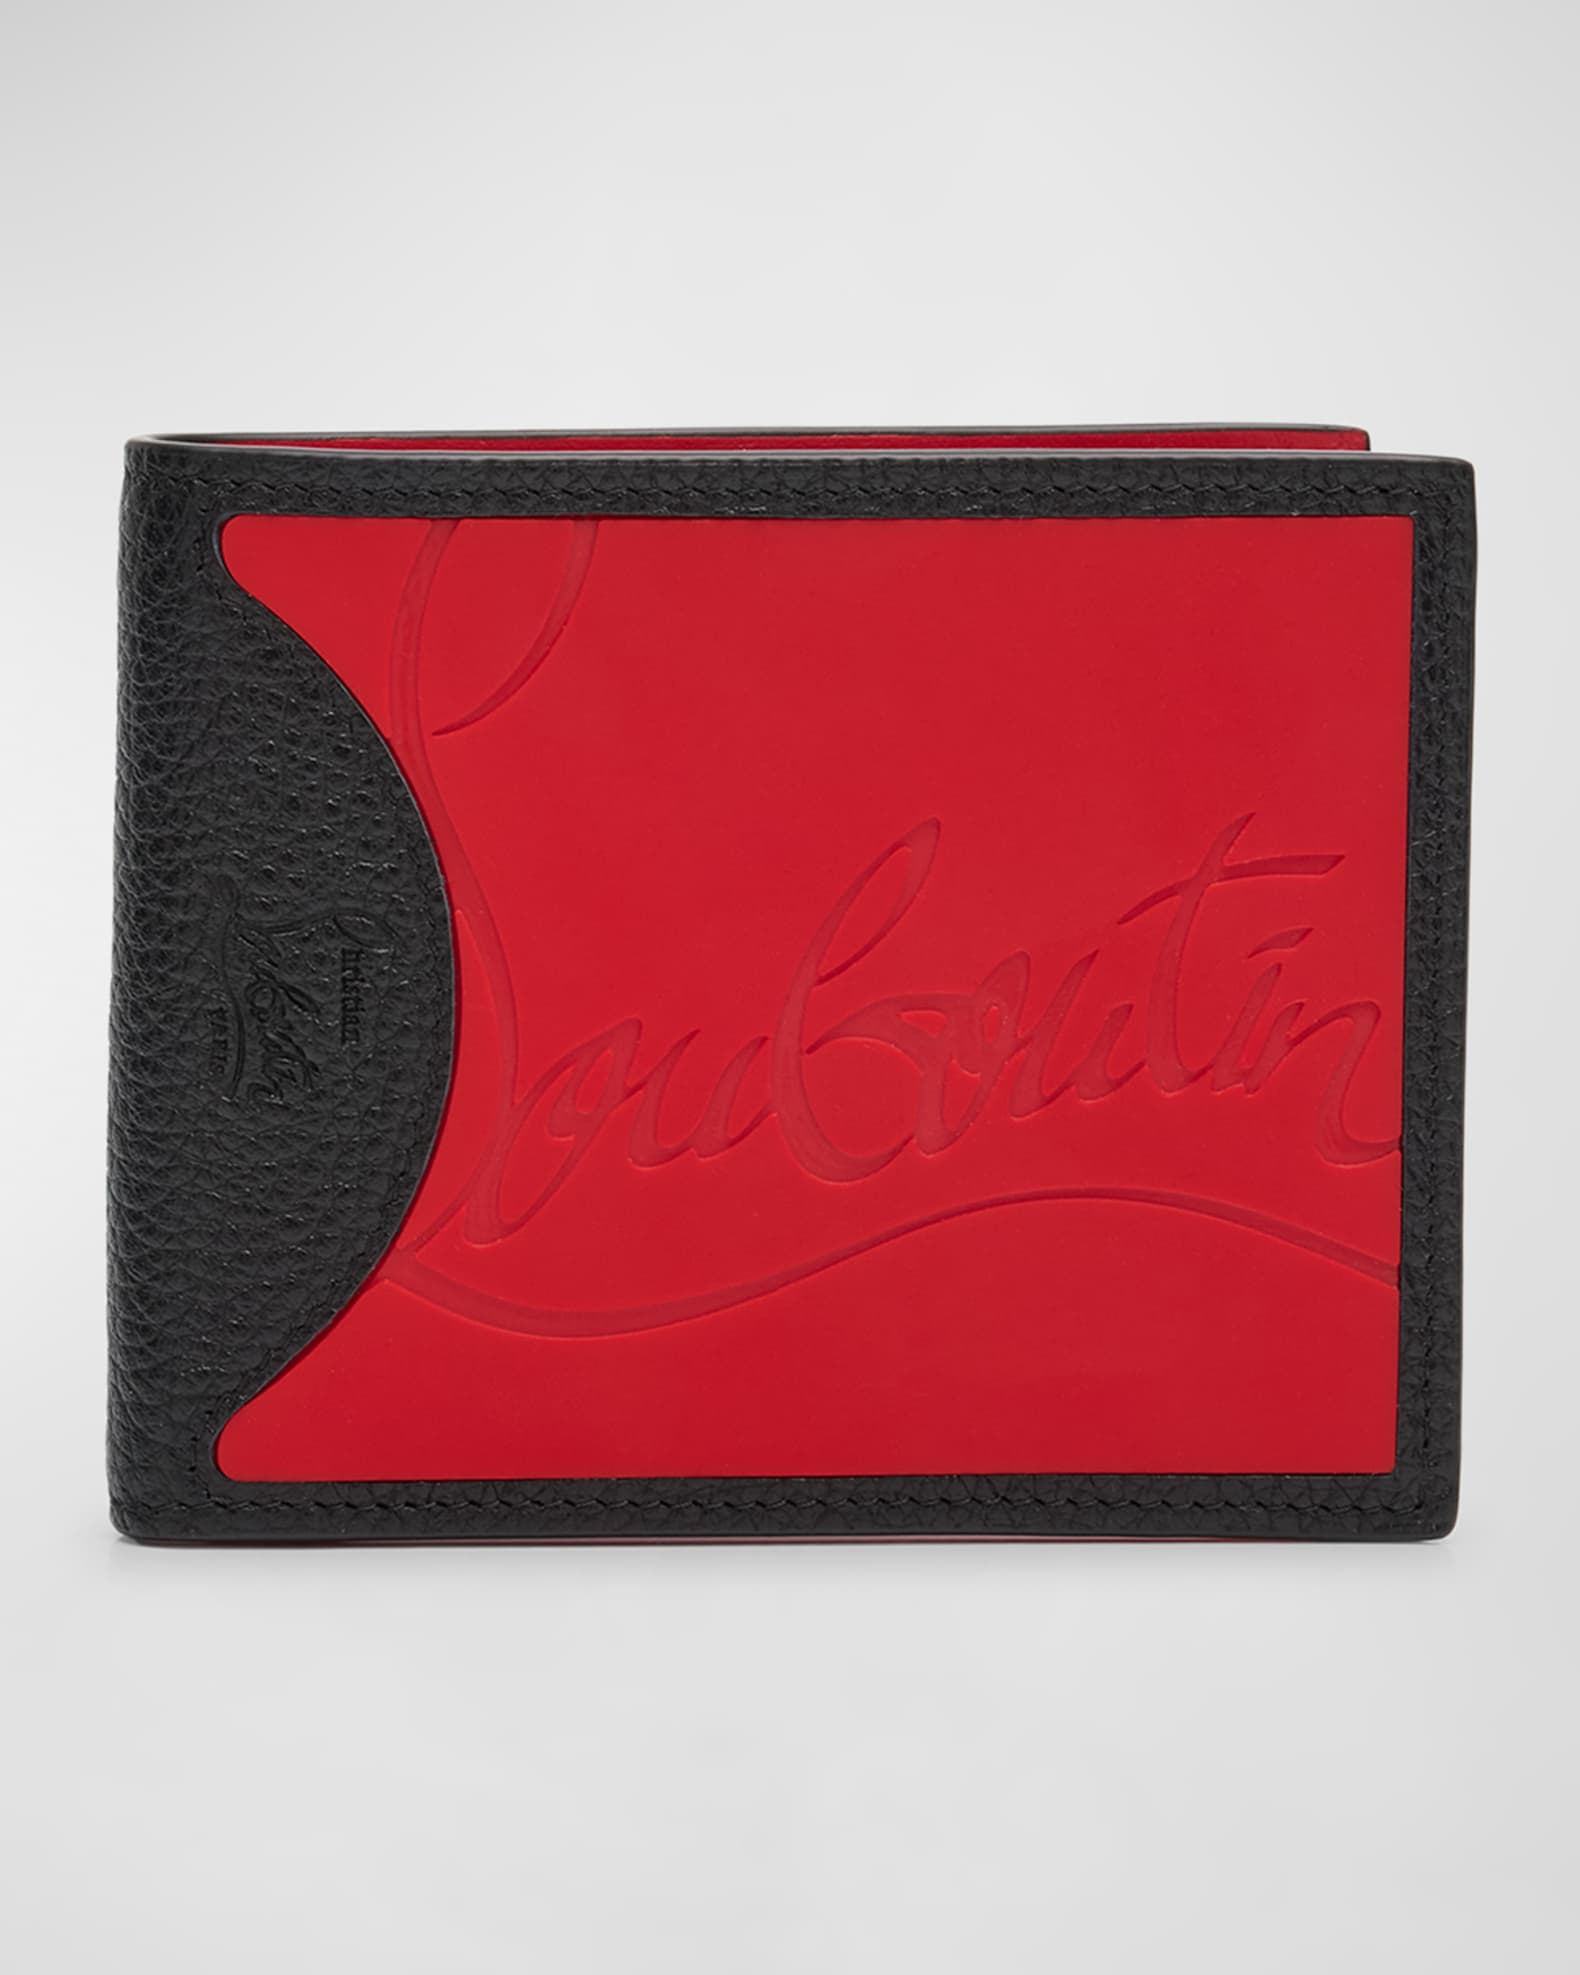 Christian Louboutin Men's Coolcard Two-Tone Leather Wallet | Neiman Marcus